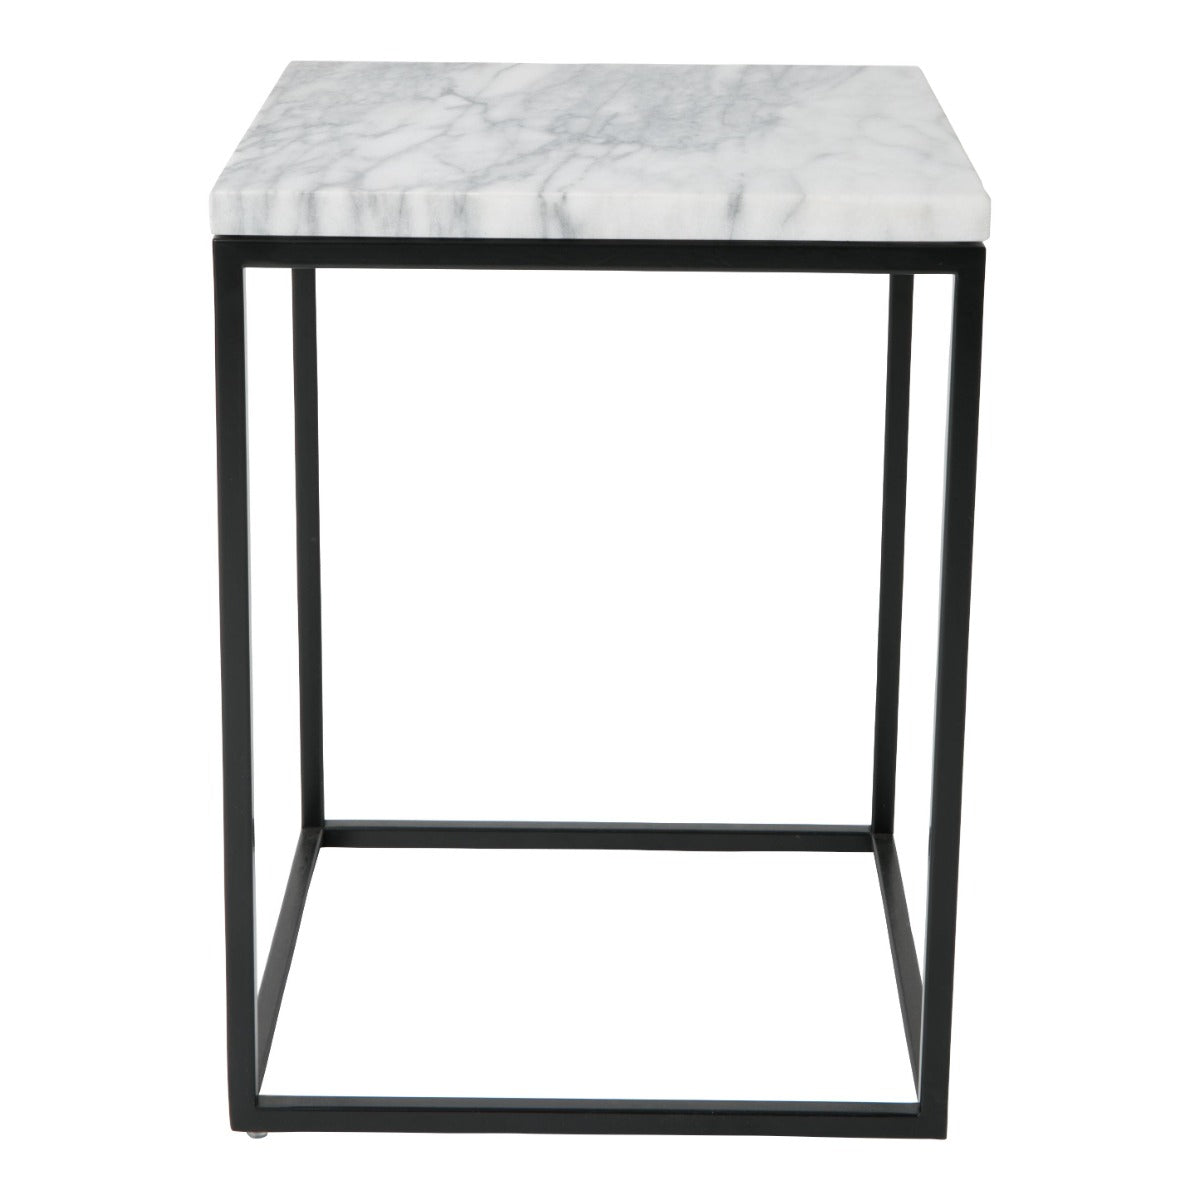 MARBLE POWER marble table